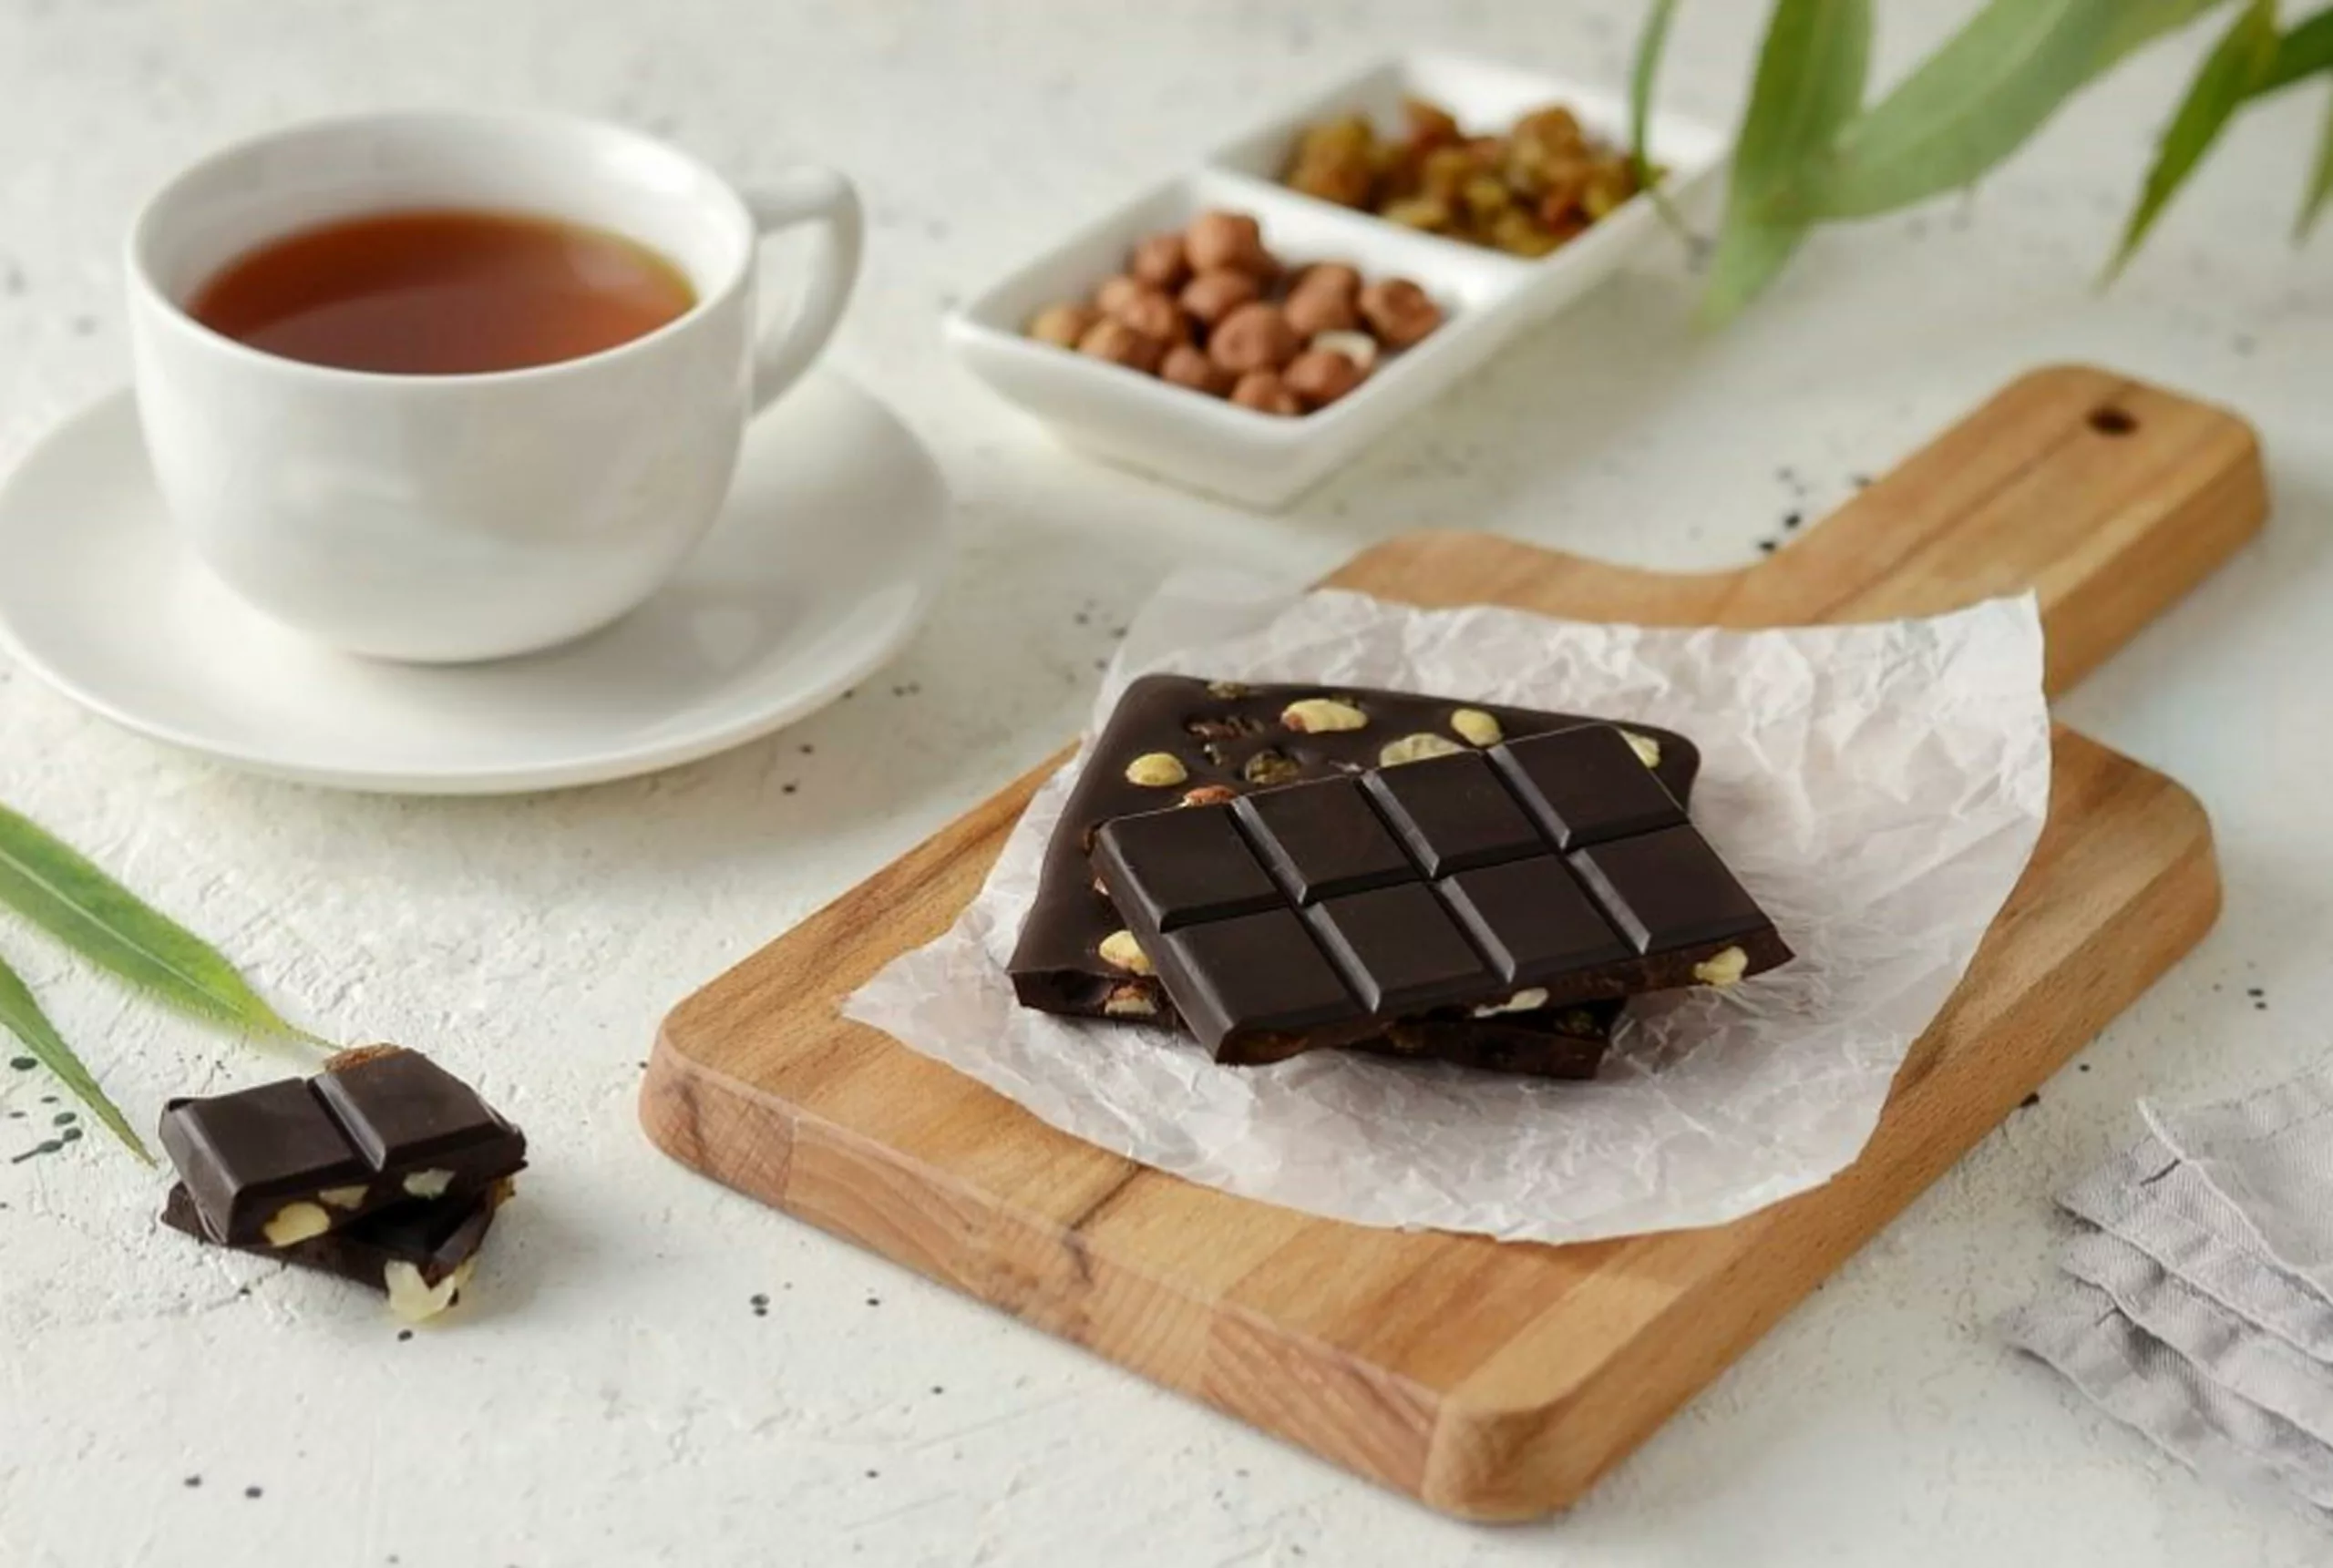 Chocolate bars are a great treat to enjoy in your IBS-Friendly diet.